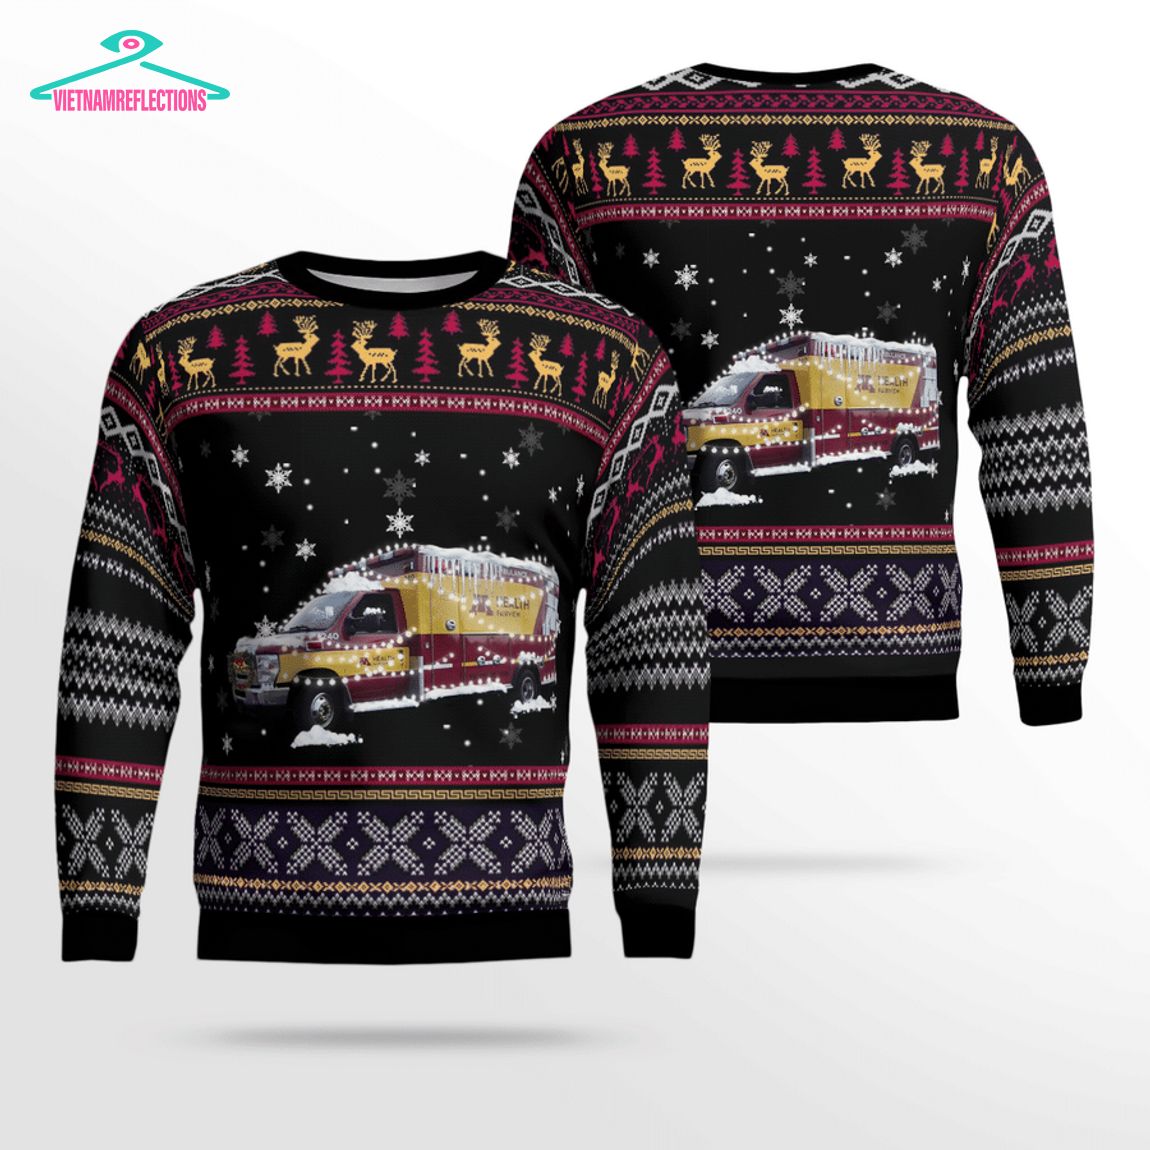 M Health Fairview EMS 3D Christmas Sweater - You look so healthy and fit